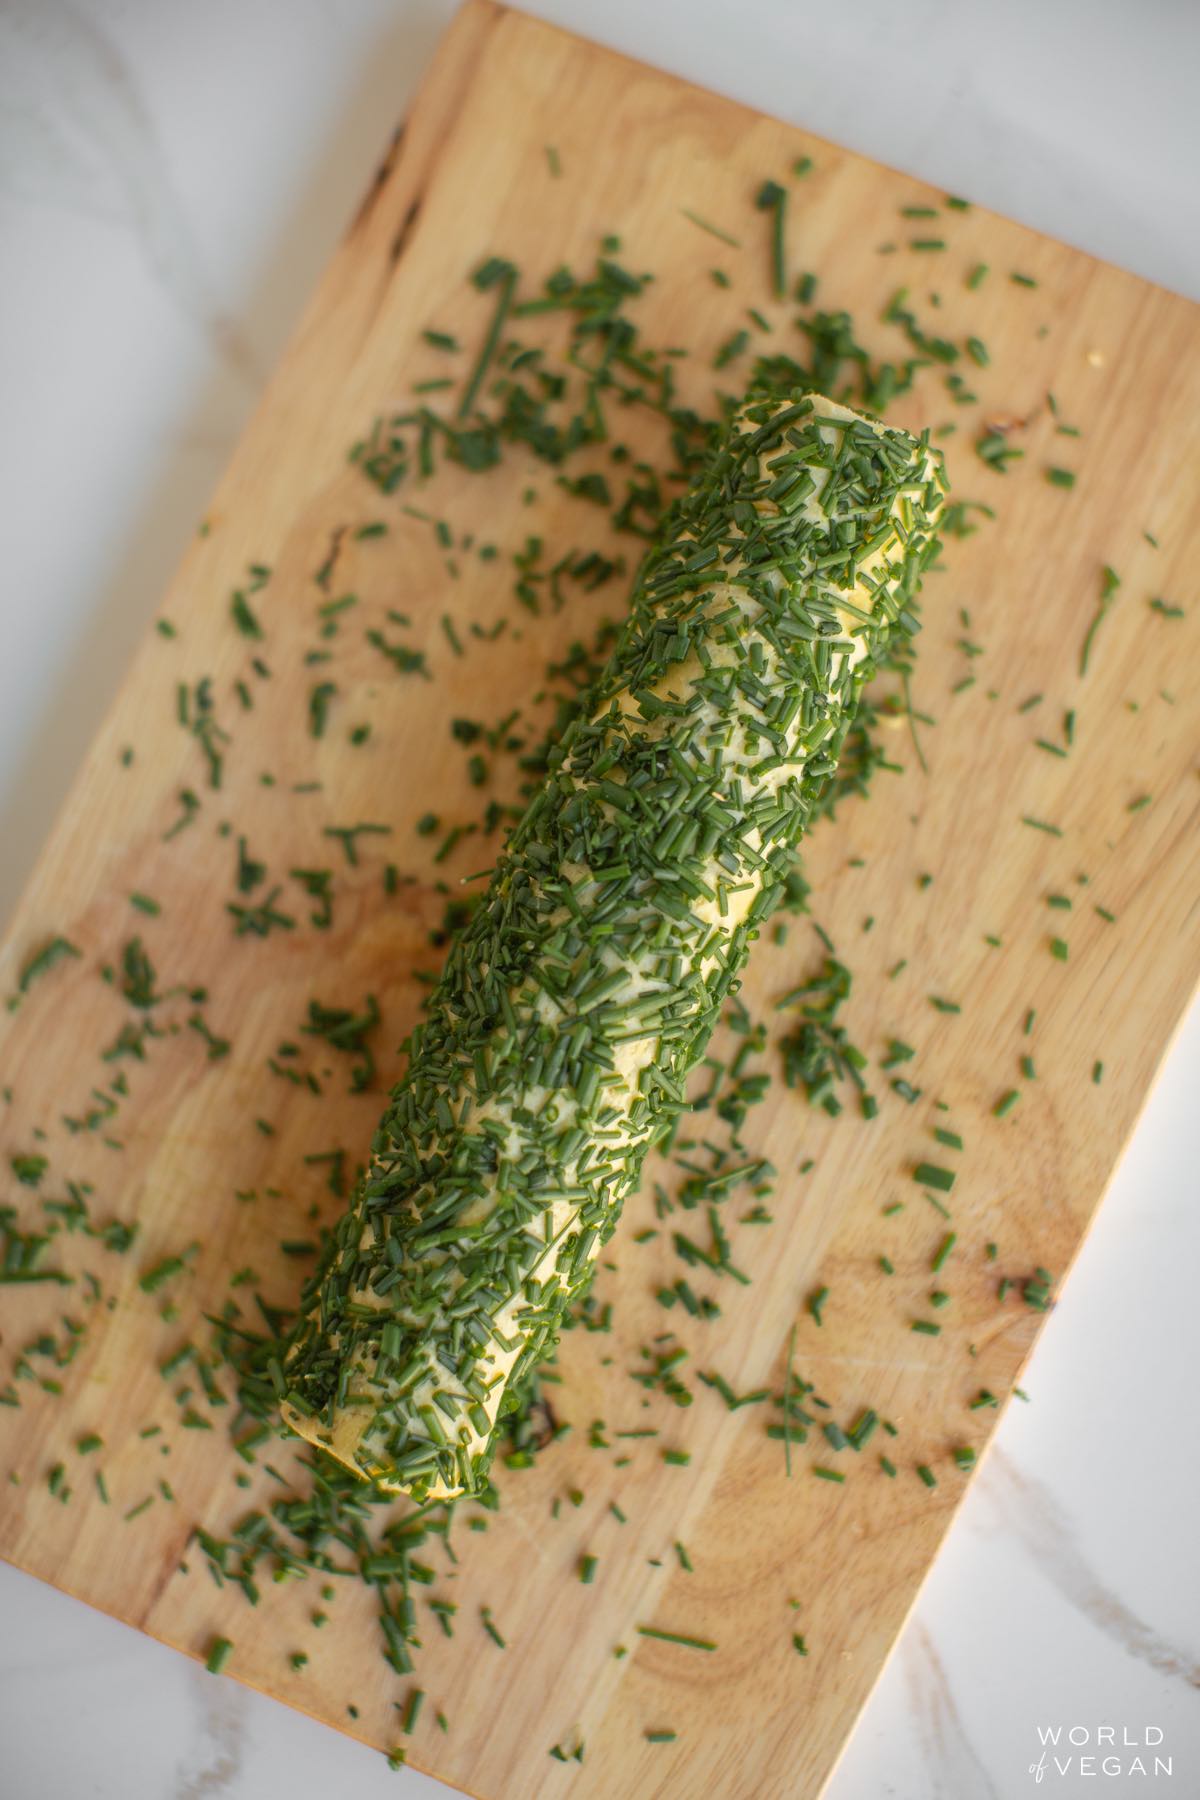 Rolling the vegan cheese log in chopped chives on a cutting board.